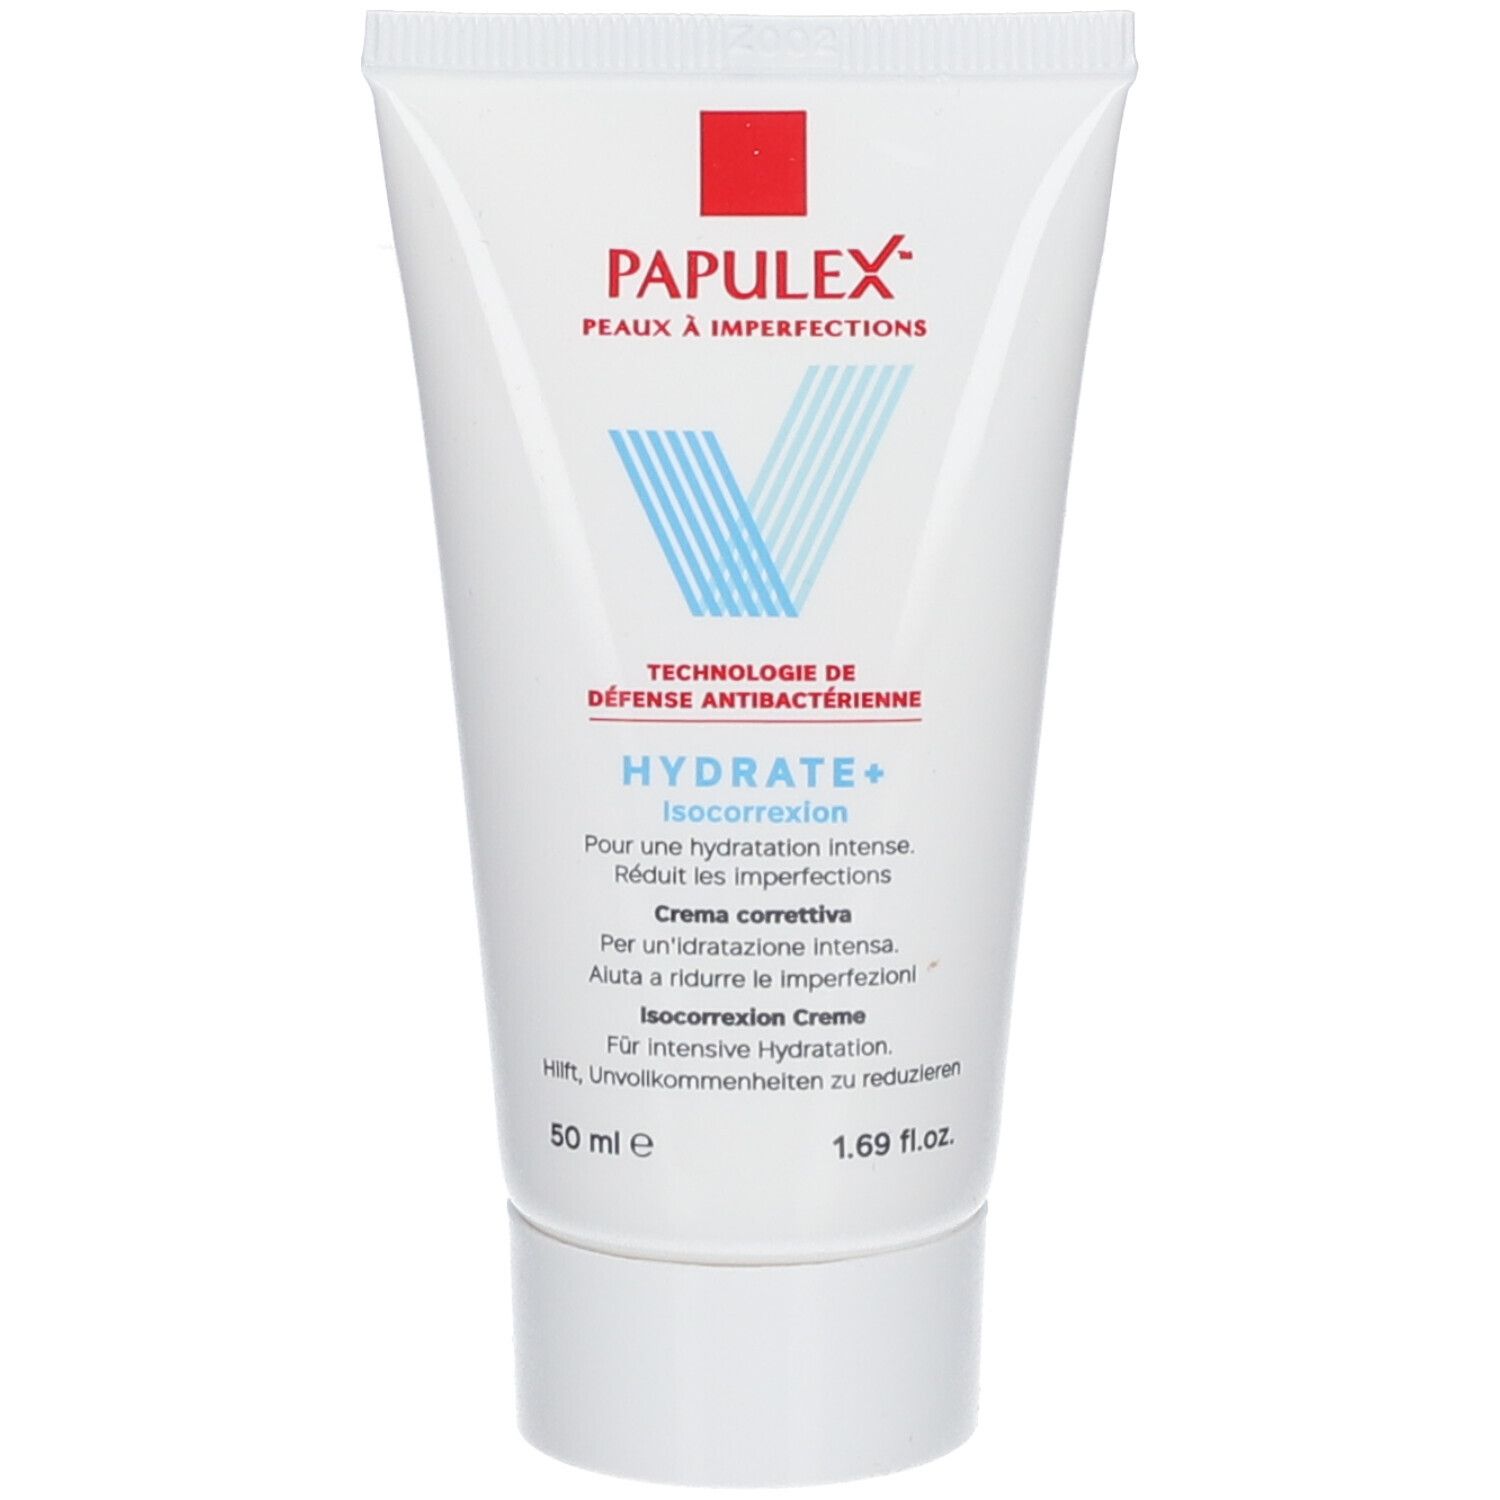 Papulex™ Isocorrexion Hydrate+